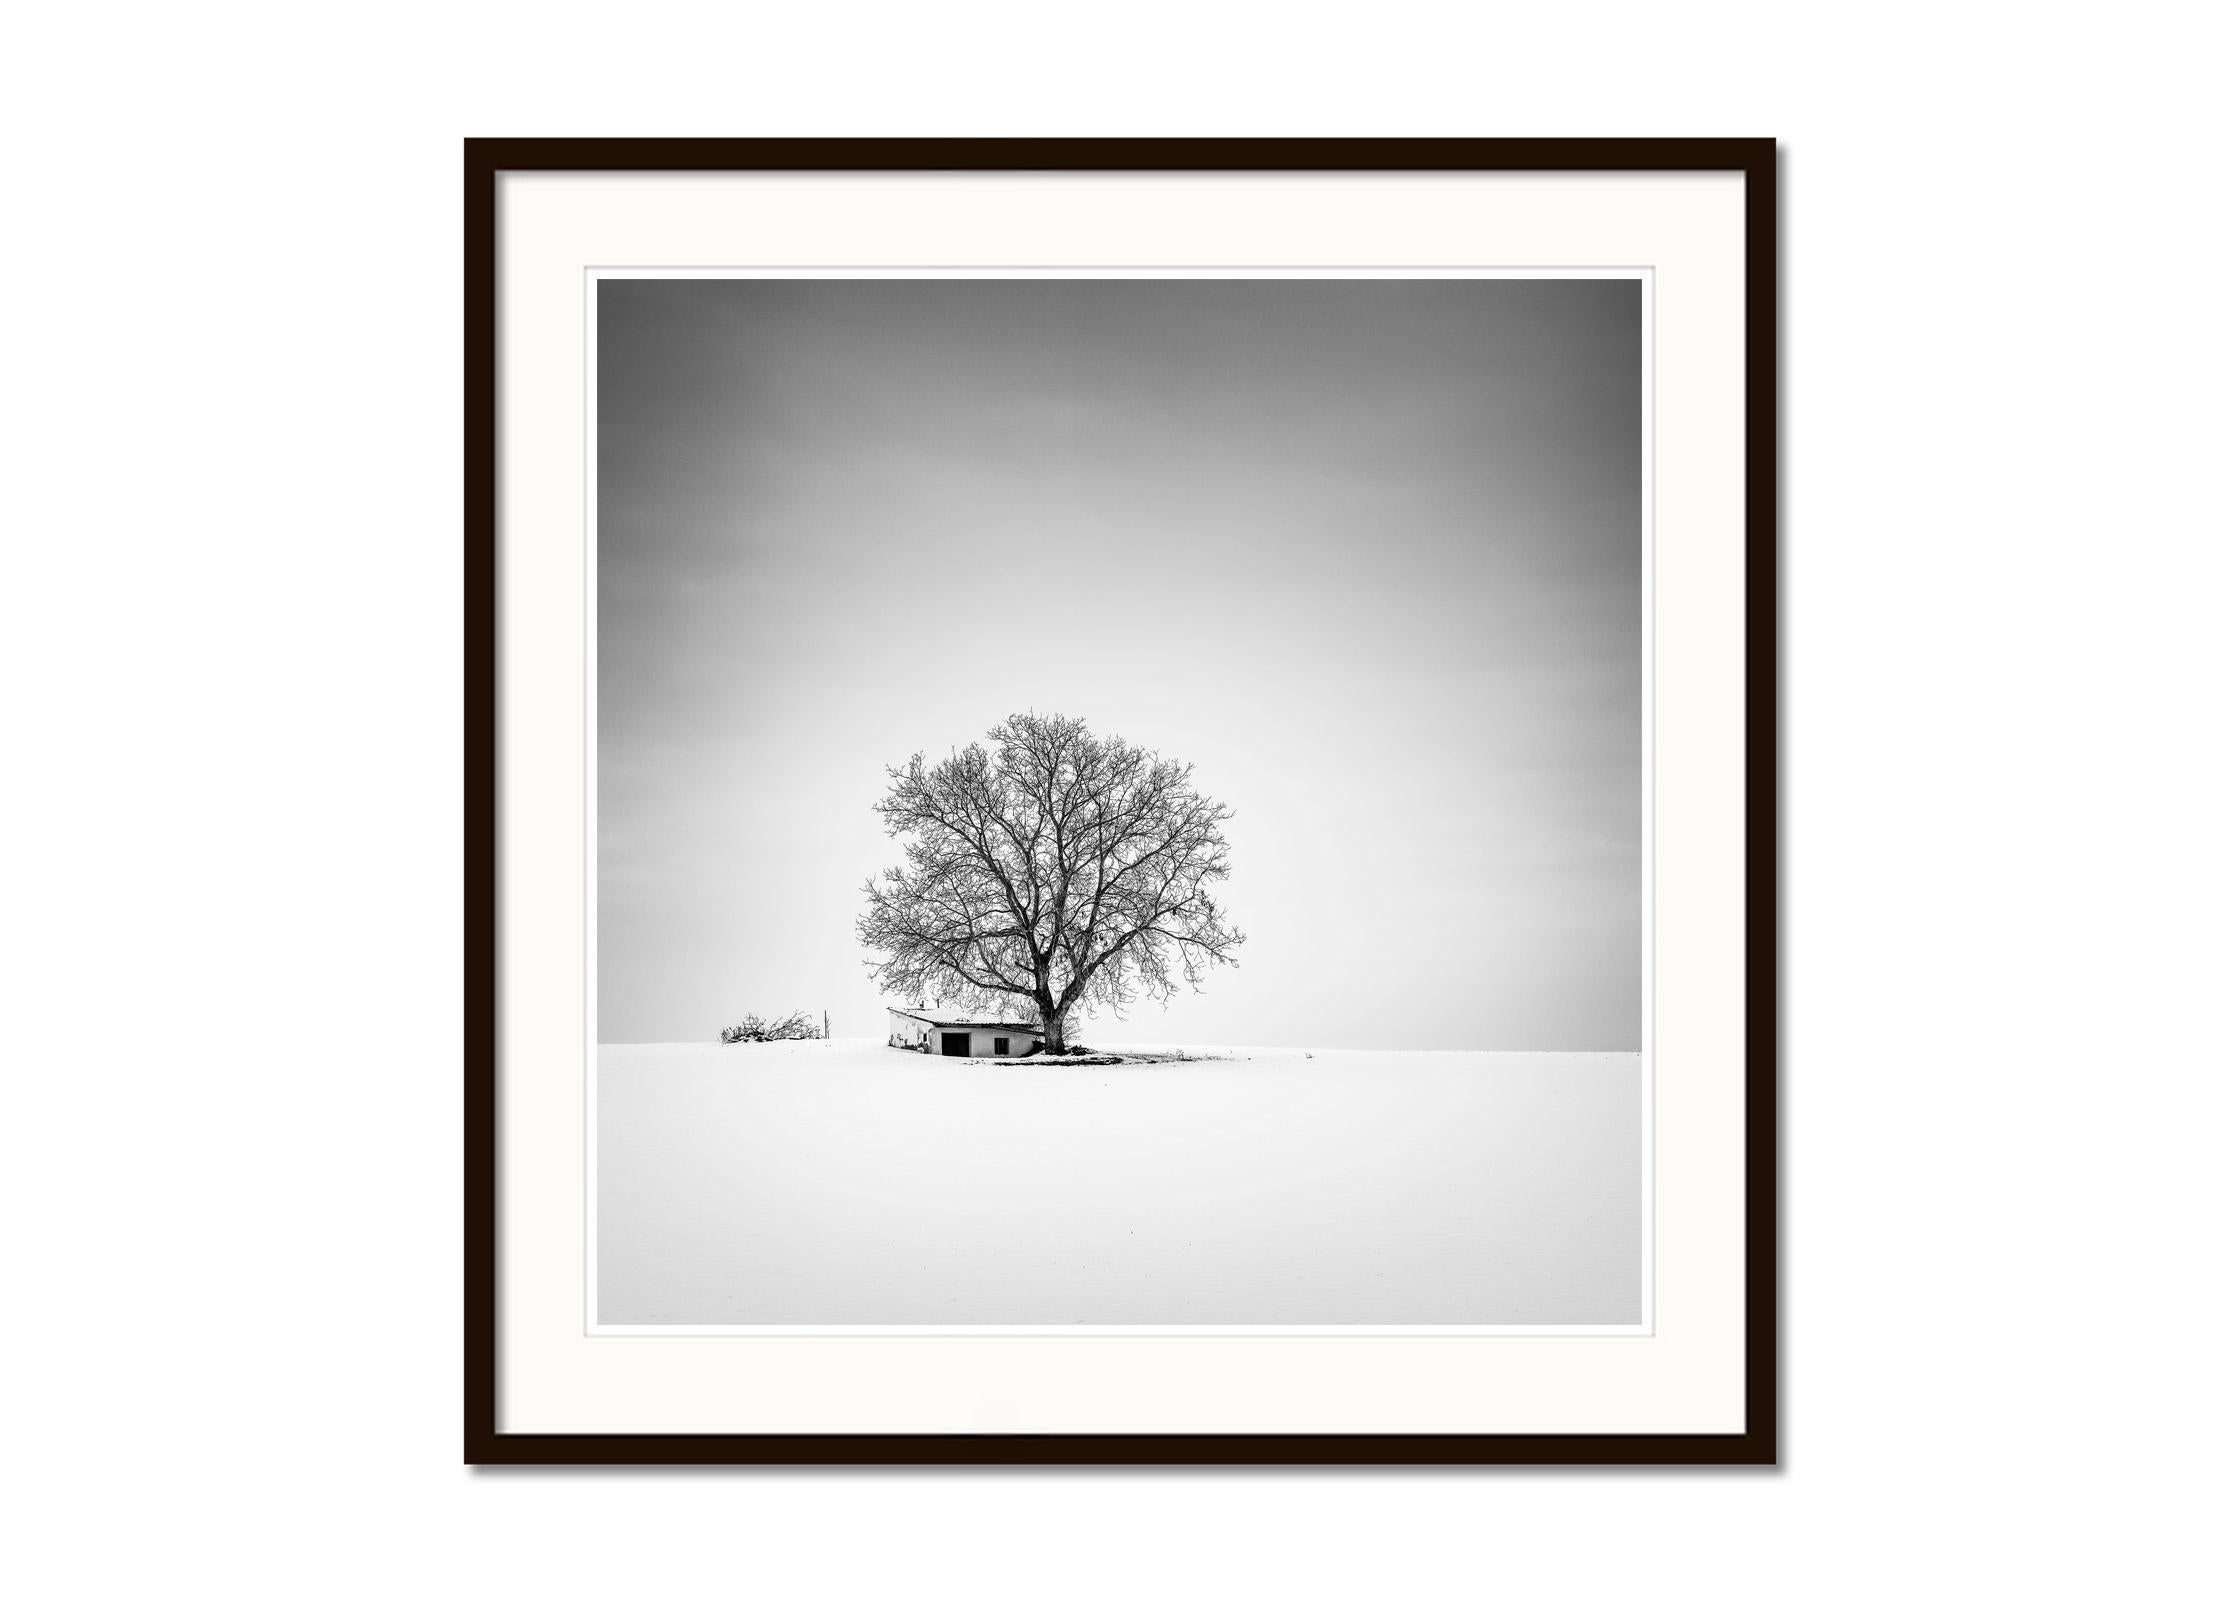 Wine Press House, snow, winter, black and white fine art landscape photography - Contemporary Photograph by Gerald Berghammer